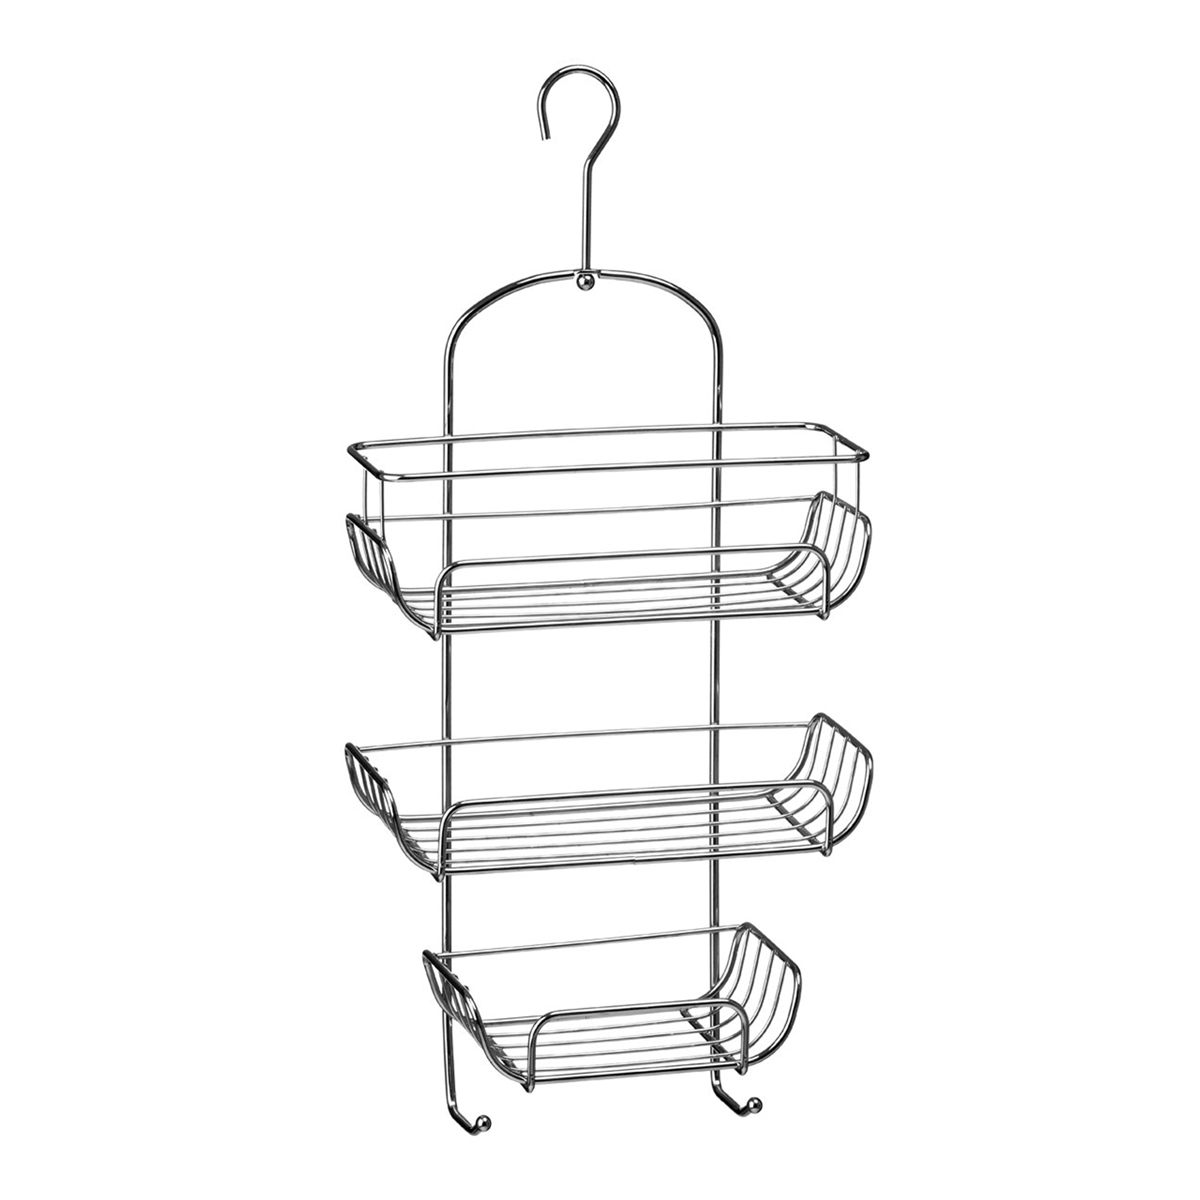 Accents Chrome 3 tier hanging shower caddy